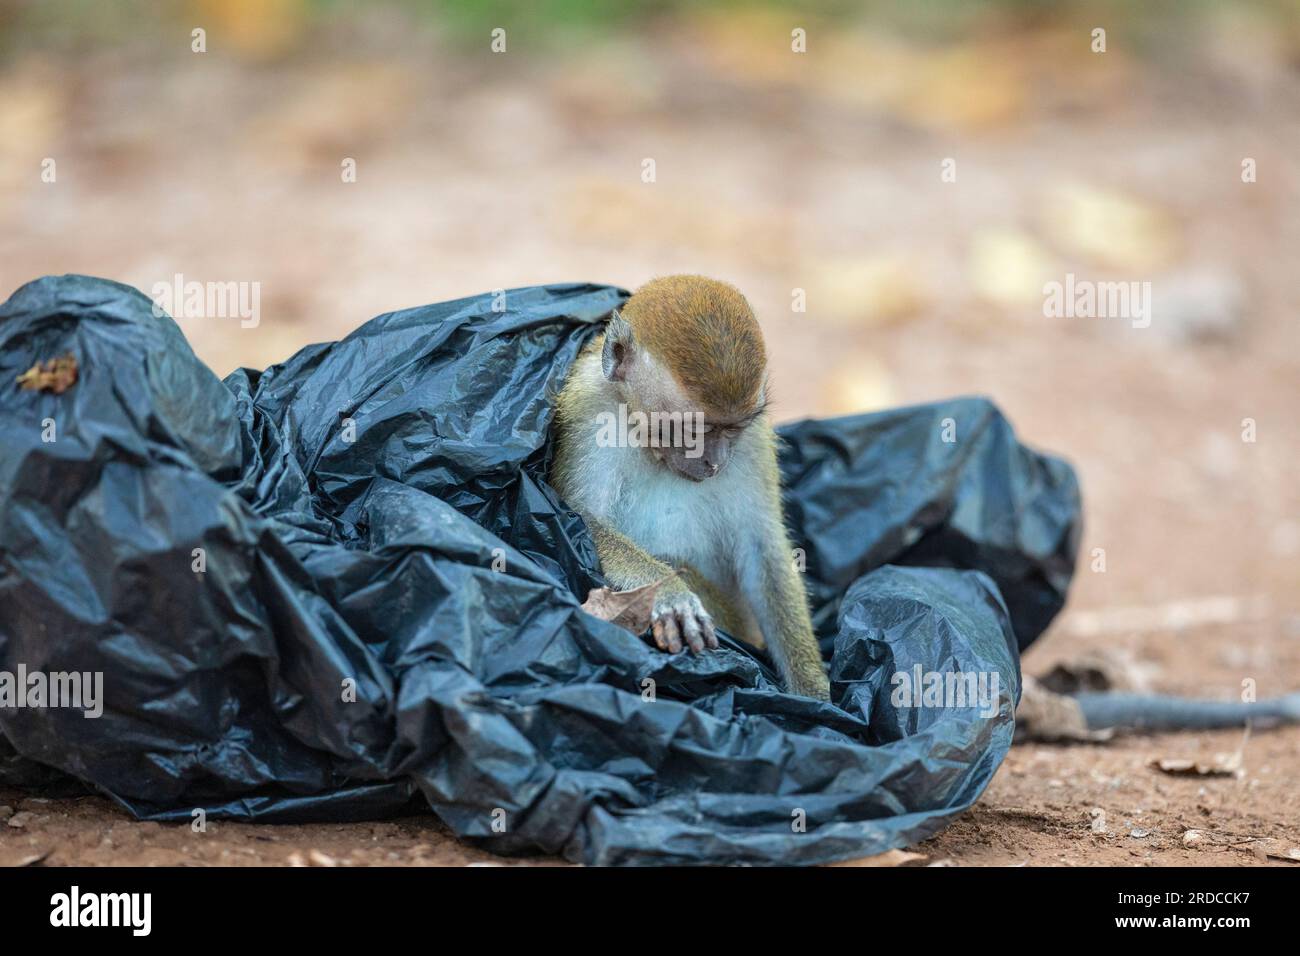 A juvenile long-tailed macaque plays with a black plastic bag, Singapore Stock Photo